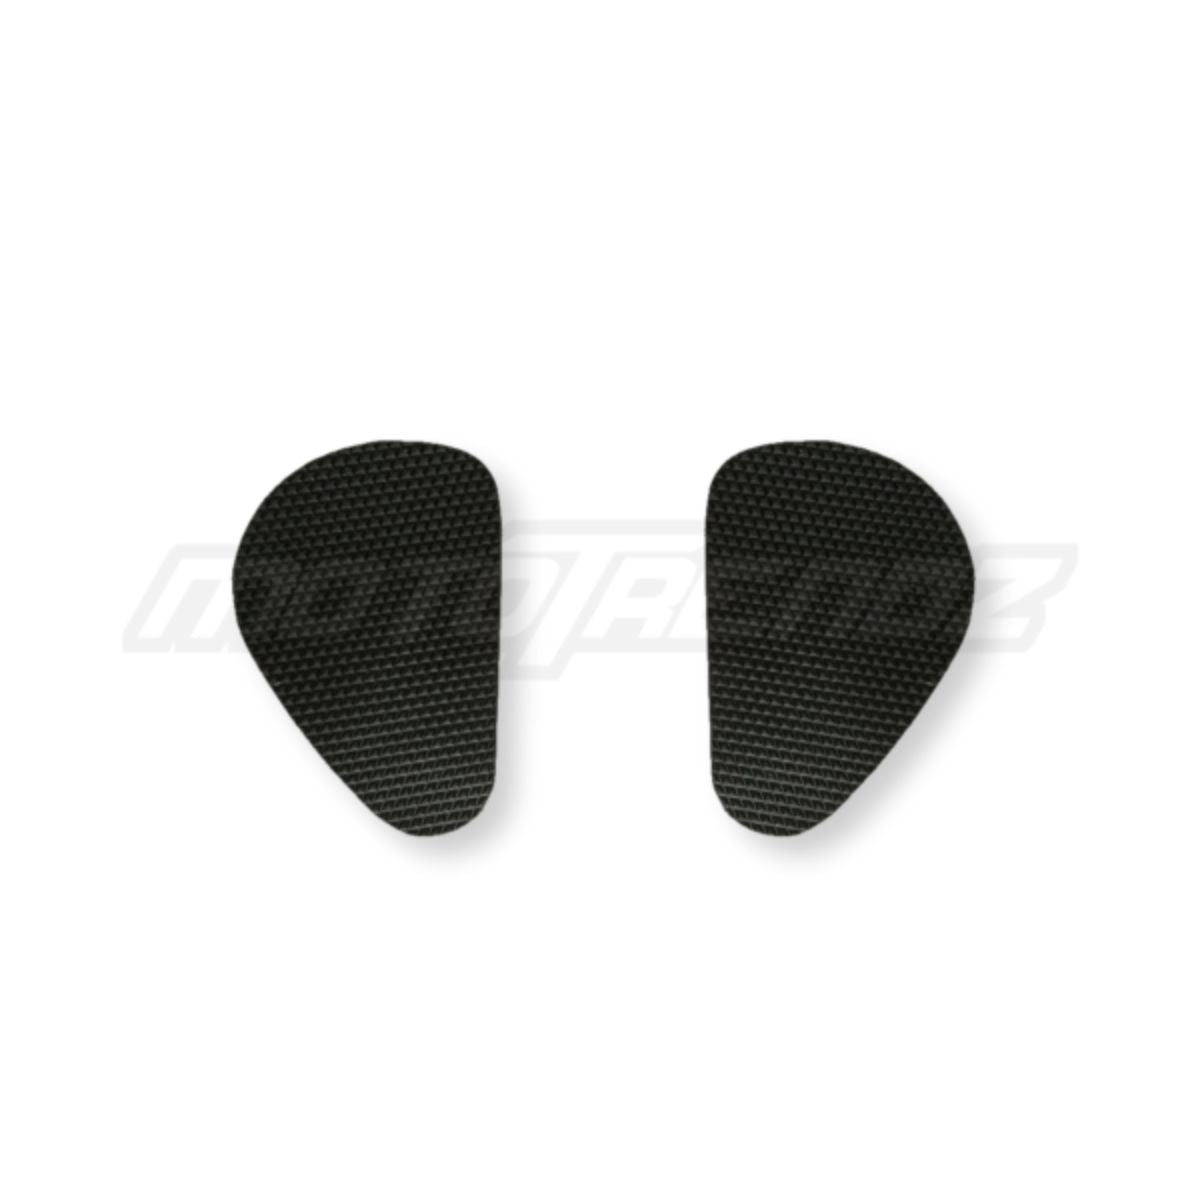 Traction Pads for Royal Enfield Thunderbird/Thunderbird X 4